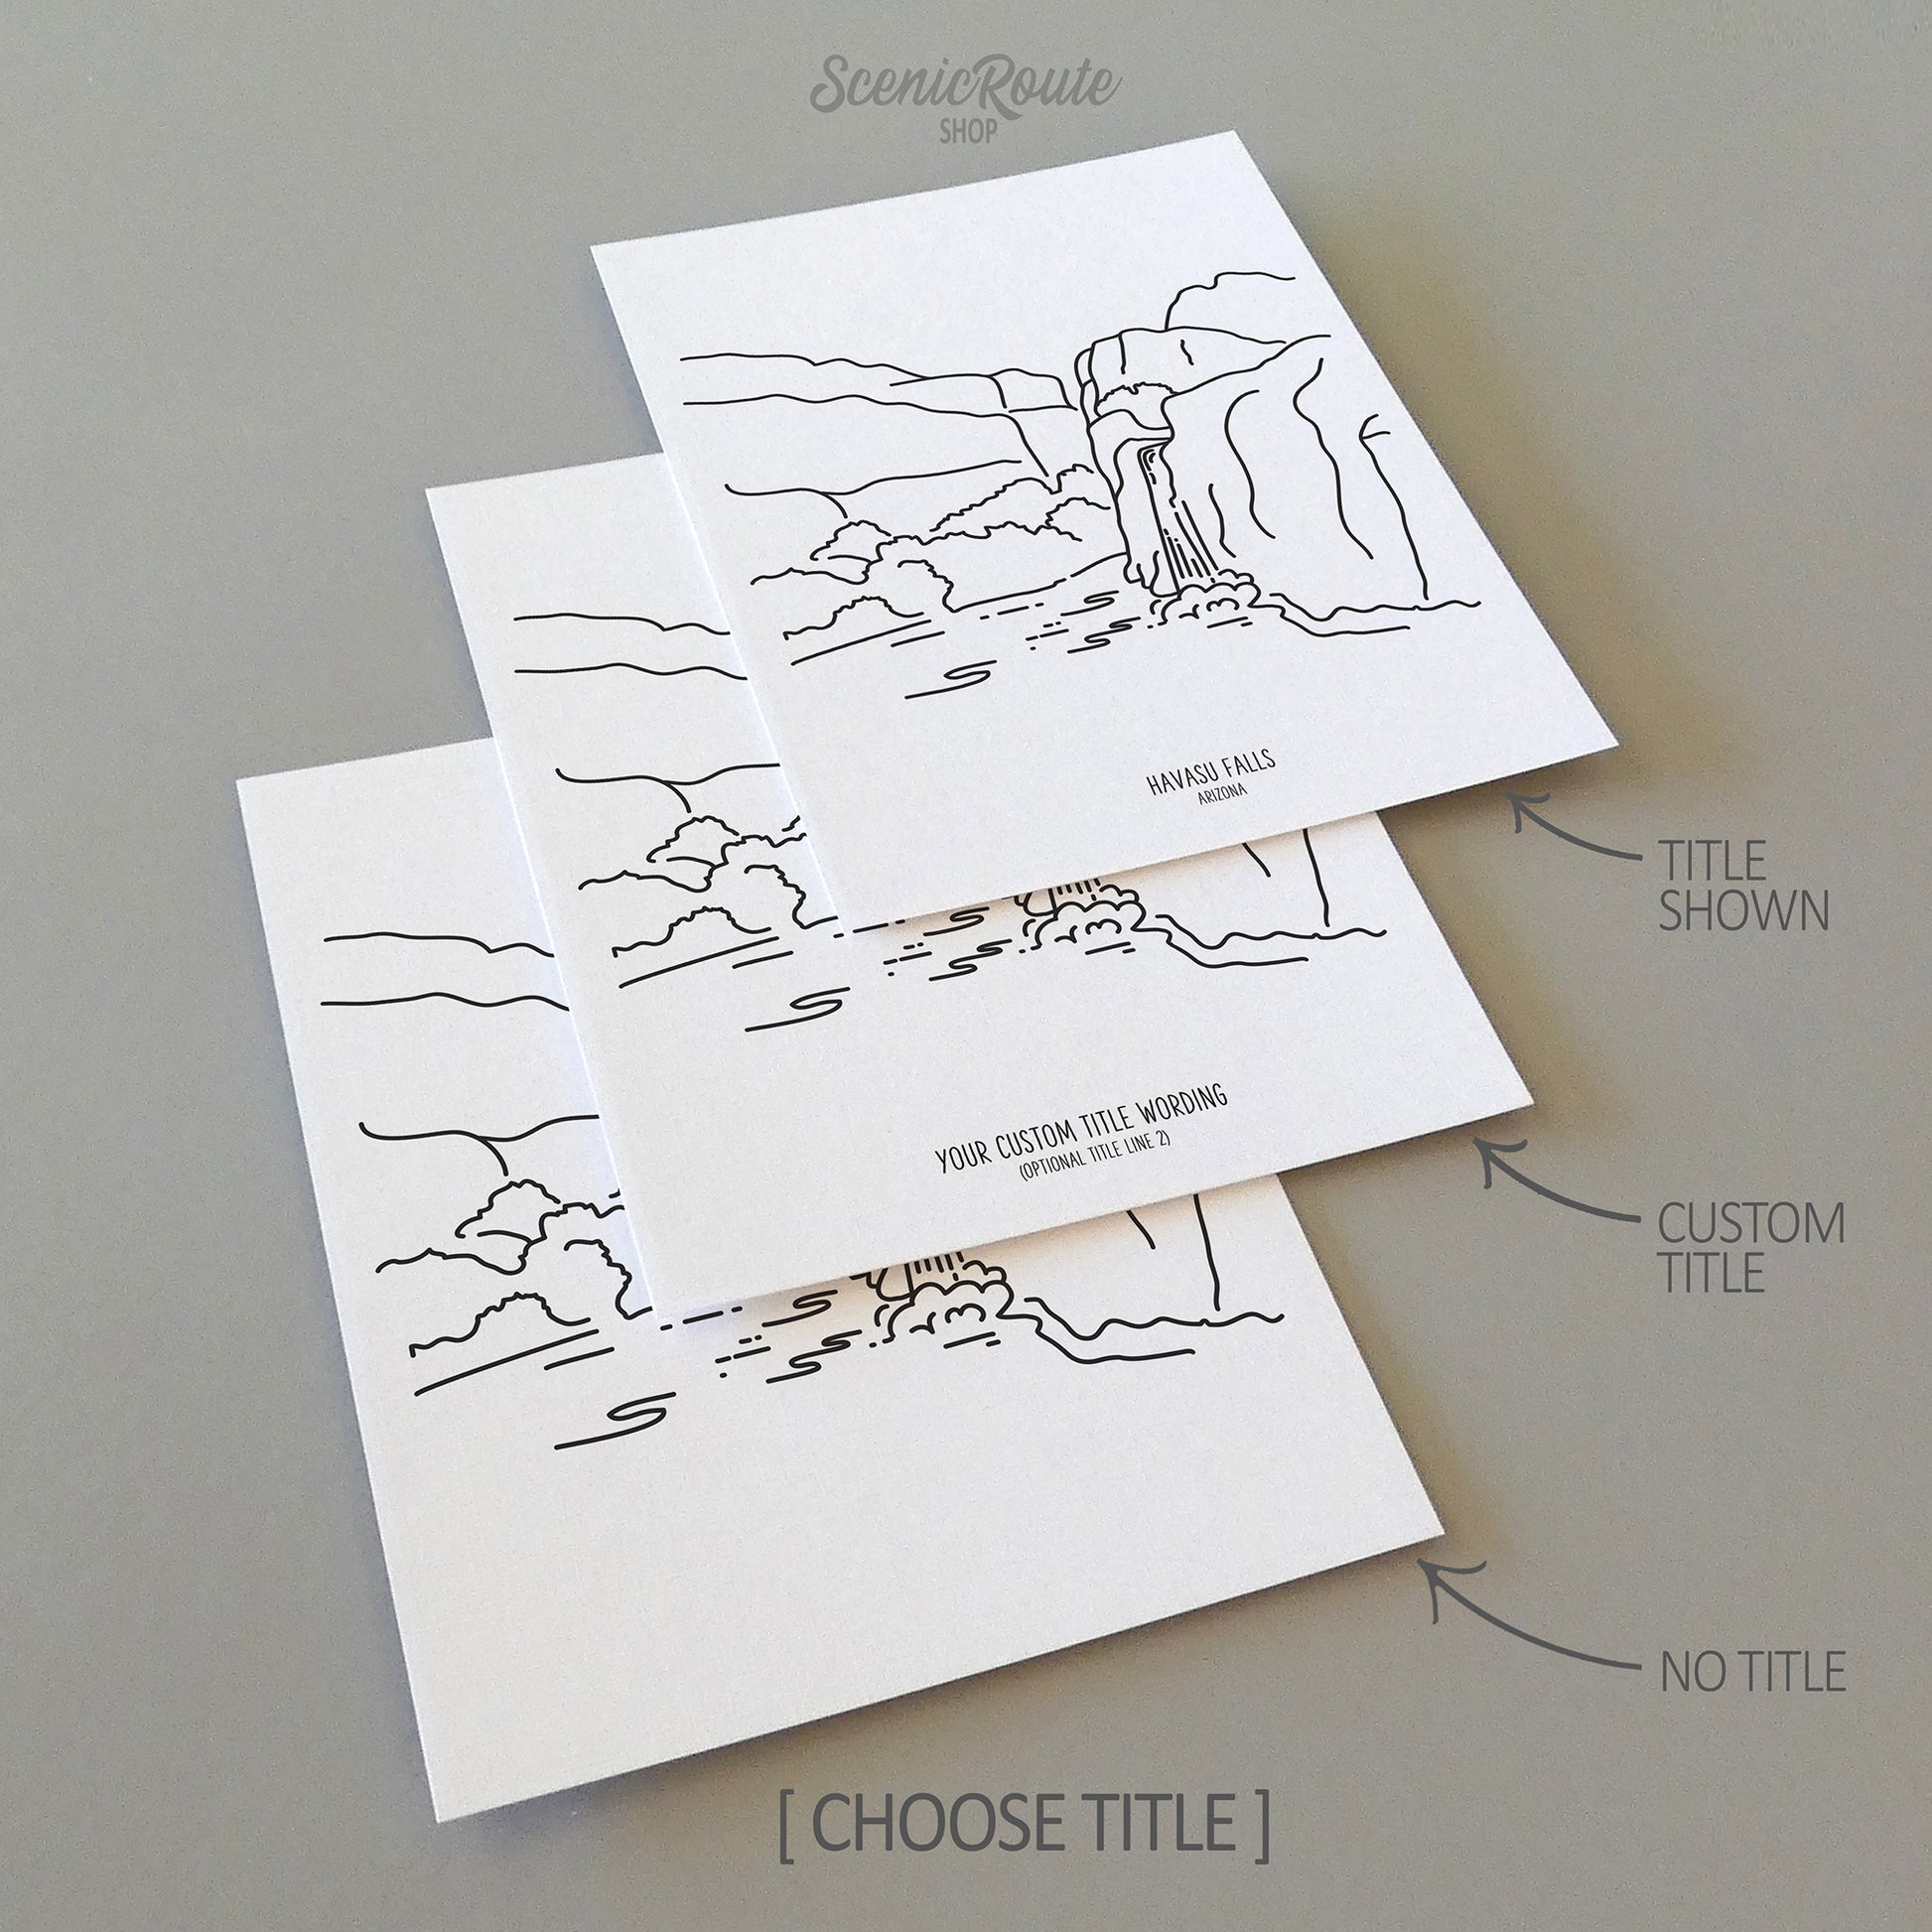 Three line art drawings of Havasu Falls in Arizona on white linen paper with a gray background.  The pieces are shown with title options that can be chosen and personalized.